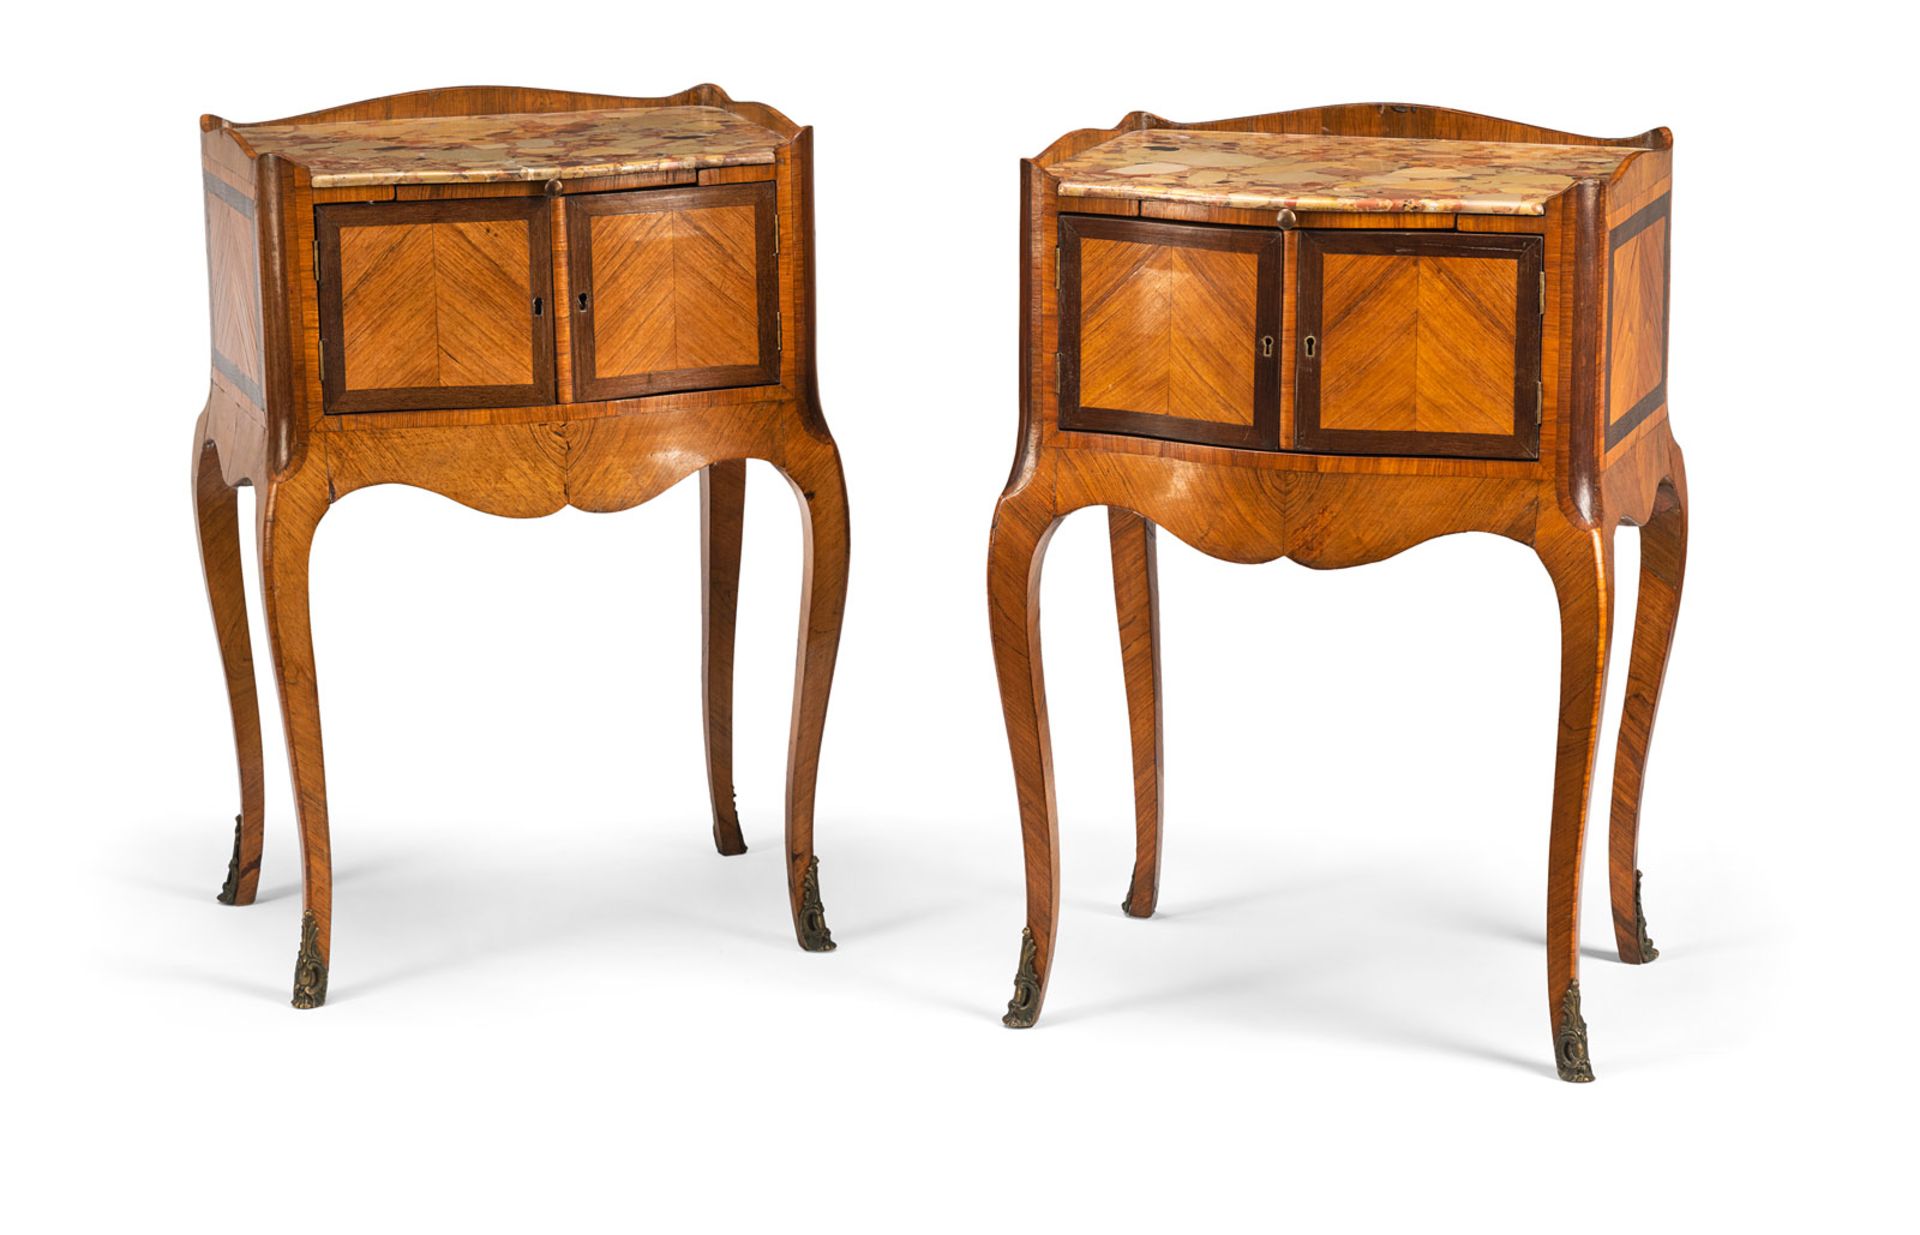 A PAIR OF FRENCH LOUIS-XV-STYLE ORMOLU MOUNTED TULIPWOOD AND AMARANTH OCCATIONAL TABLES